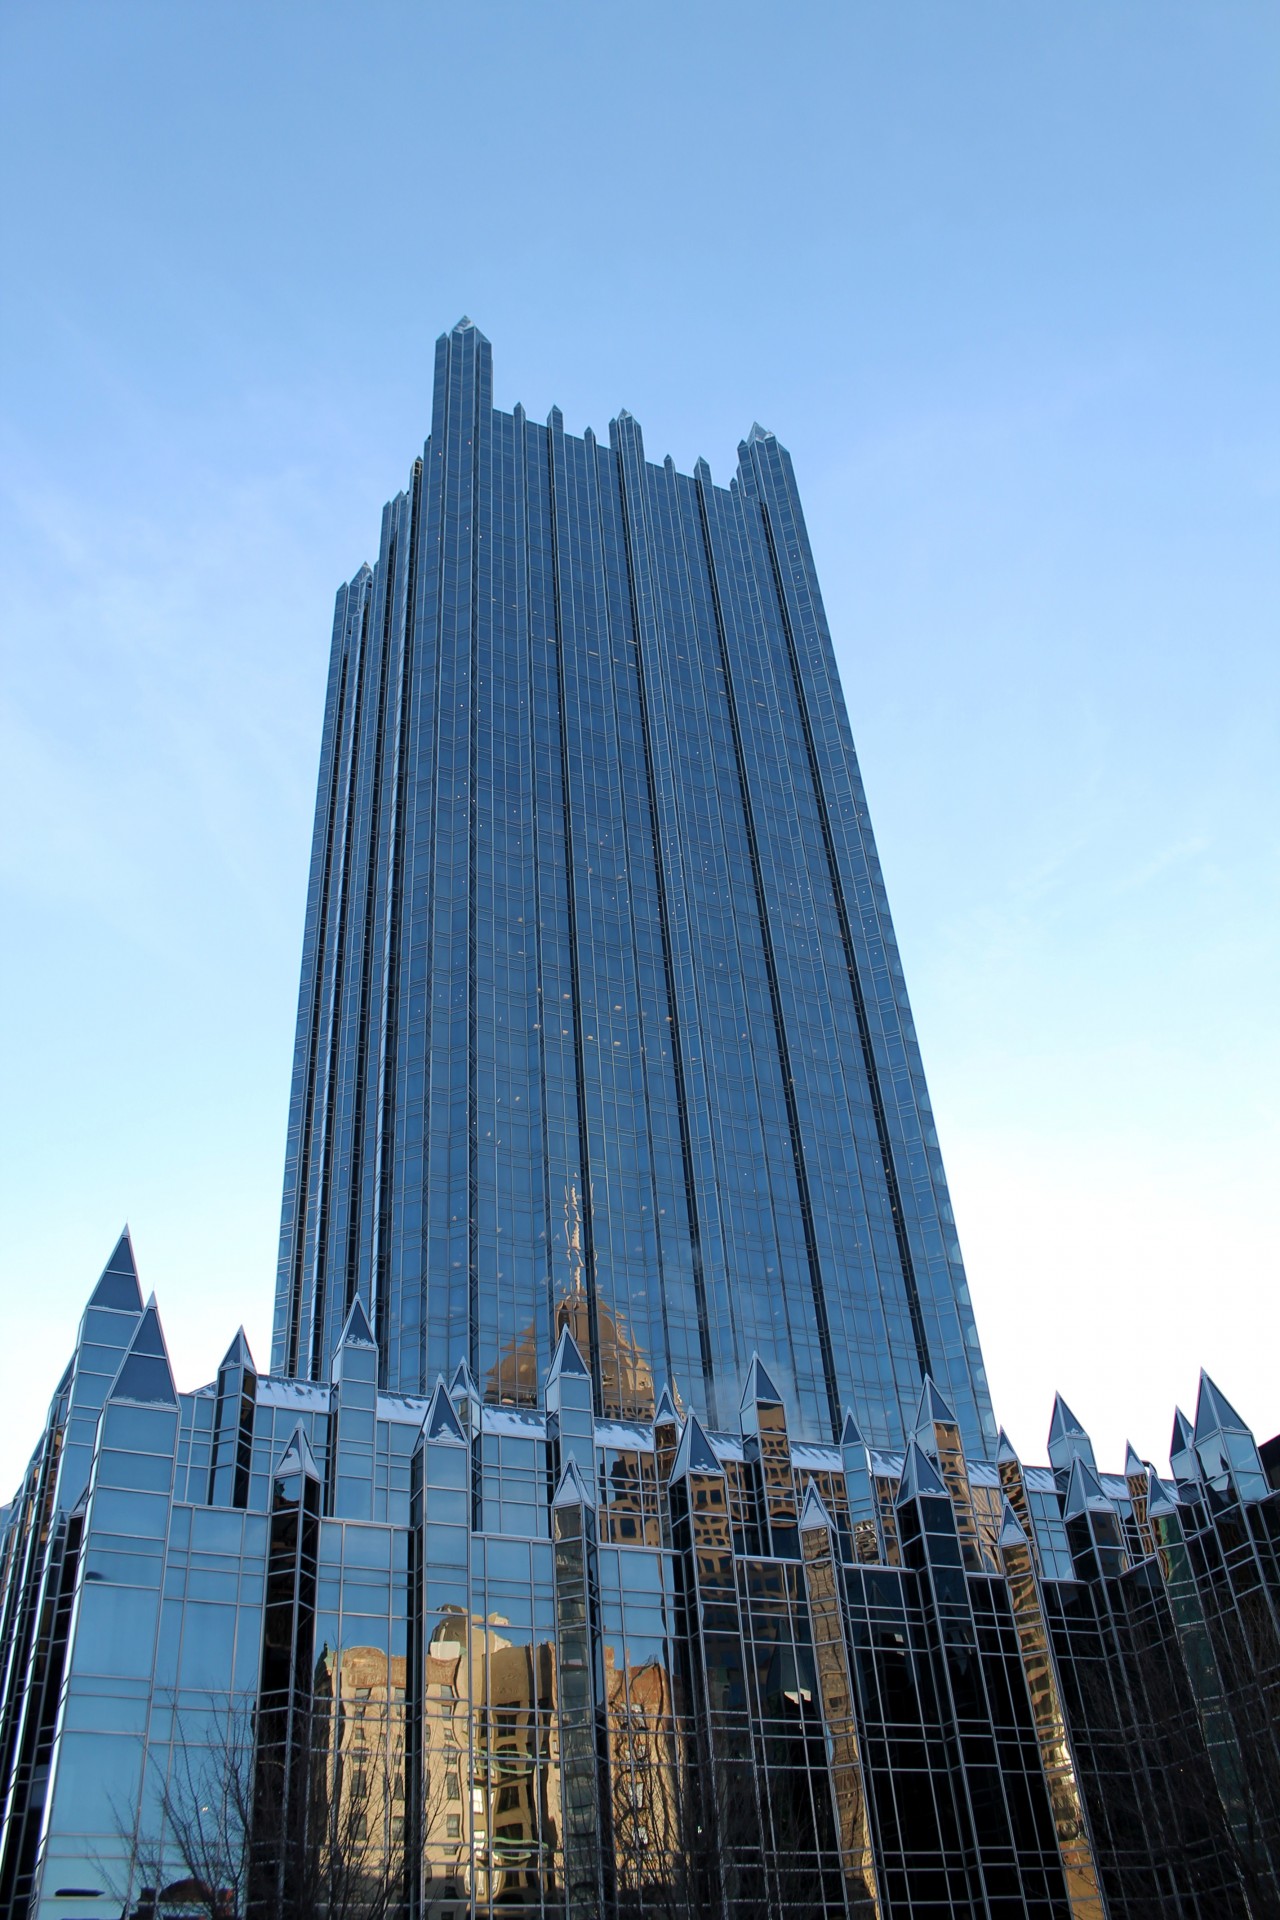 PPG Place, Pittsburgh - I really appreciate your premium download!